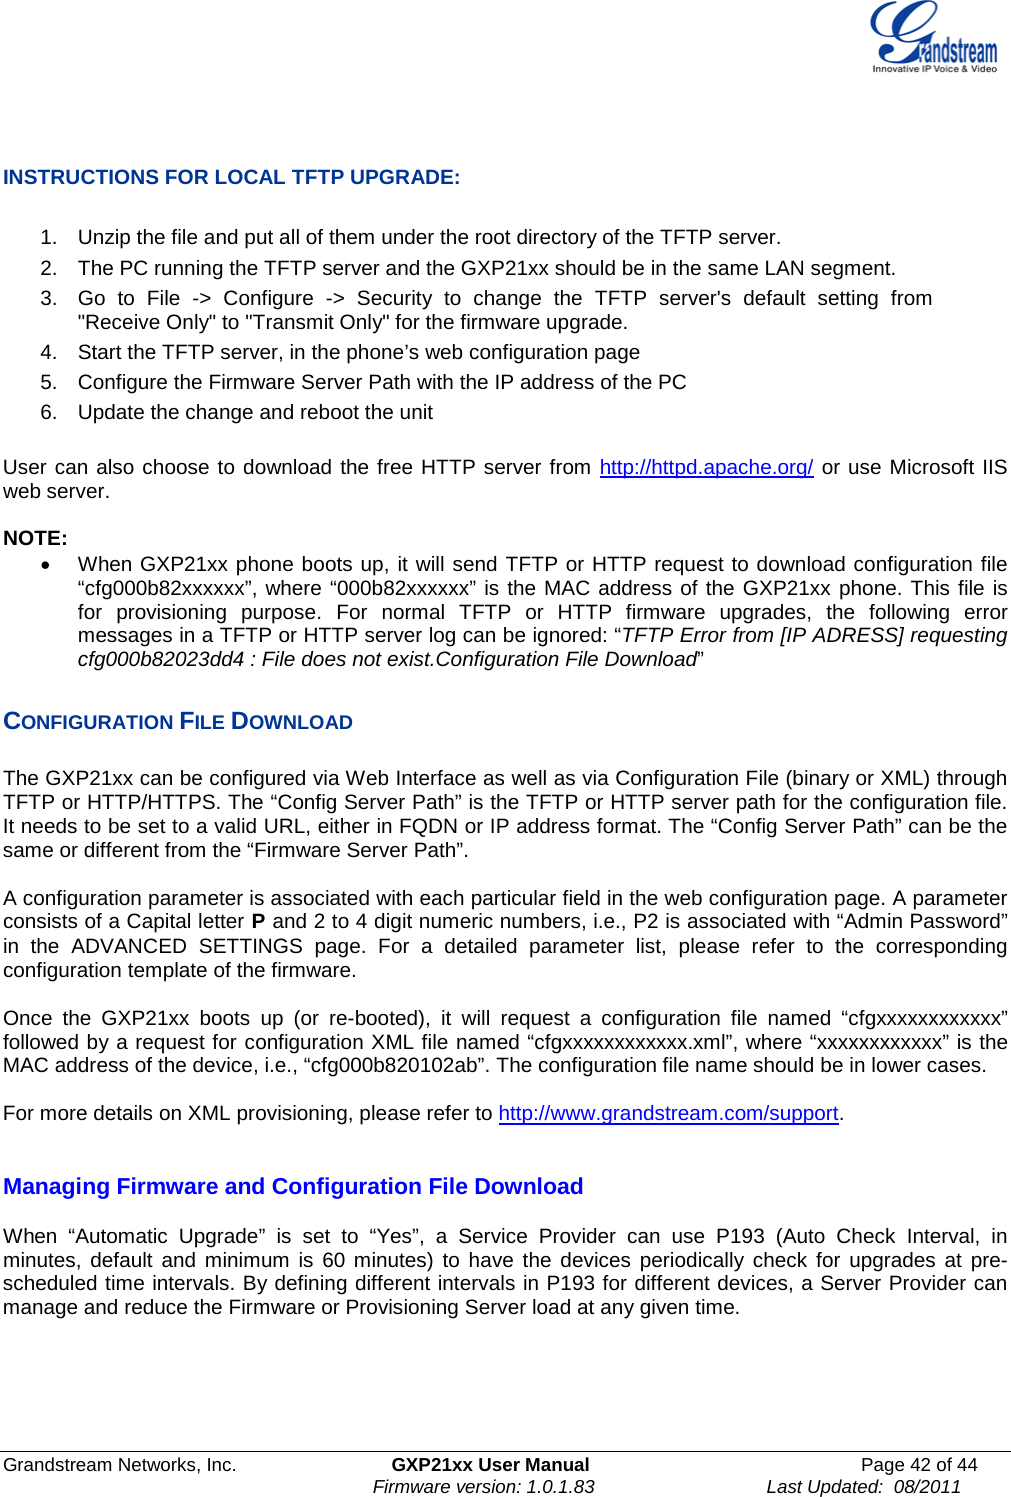  Grandstream Networks, Inc. GXP21xx User Manual Page 42 of 44                                                               Firmware version: 1.0.1.83                                 Last Updated:  08/2011    INSTRUCTIONS FOR LOCAL TFTP UPGRADE:  1. Unzip the file and put all of them under the root directory of the TFTP server.  2. The PC running the TFTP server and the GXP21xx should be in the same LAN segment. 3. Go to File -&gt; Configure -&gt; Security to change the TFTP server&apos;s default setting from &quot;Receive Only&quot; to &quot;Transmit Only&quot; for the firmware upgrade.  4. Start the TFTP server, in the phone’s web configuration page 5. Configure the Firmware Server Path with the IP address of the PC 6. Update the change and reboot the unit   User can also choose to download the free HTTP server from http://httpd.apache.org/ or use Microsoft IIS web server.  NOTE: • When GXP21xx phone boots up, it will send TFTP or HTTP request to download configuration file “cfg000b82xxxxxx”, where “000b82xxxxxx” is the MAC address of the GXP21xx phone. This file is for provisioning purpose. For normal TFTP or HTTP firmware upgrades, the following error messages in a TFTP or HTTP server log can be ignored: “TFTP Error from [IP ADRESS] requesting cfg000b82023dd4 : File does not exist.Configuration File Download”  CONFIGURATION FILE DOWNLOAD  The GXP21xx can be configured via Web Interface as well as via Configuration File (binary or XML) through TFTP or HTTP/HTTPS. The “Config Server Path” is the TFTP or HTTP server path for the configuration file. It needs to be set to a valid URL, either in FQDN or IP address format. The “Config Server Path” can be the same or different from the “Firmware Server Path”.  A configuration parameter is associated with each particular field in the web configuration page. A parameter consists of a Capital letter P and 2 to 4 digit numeric numbers, i.e., P2 is associated with “Admin Password” in the ADVANCED SETTINGS page. For a detailed parameter list, please refer to the corresponding configuration template of the firmware.   Once the GXP21xx boots up (or re-booted), it will request a configuration file named “cfgxxxxxxxxxxxx” followed by a request for configuration XML file named “cfgxxxxxxxxxxxx.xml”, where “xxxxxxxxxxxx” is the MAC address of the device, i.e., “cfg000b820102ab”. The configuration file name should be in lower cases.  For more details on XML provisioning, please refer to http://www.grandstream.com/support.     Managing Firmware and Configuration File Download  When “Automatic Upgrade” is set to “Yes”, a Service Provider can use P193 (Auto Check Interval, in minutes, default and minimum is 60 minutes) to have the devices periodically check for upgrades at pre-scheduled time intervals. By defining different intervals in P193 for different devices, a Server Provider can manage and reduce the Firmware or Provisioning Server load at any given time.  